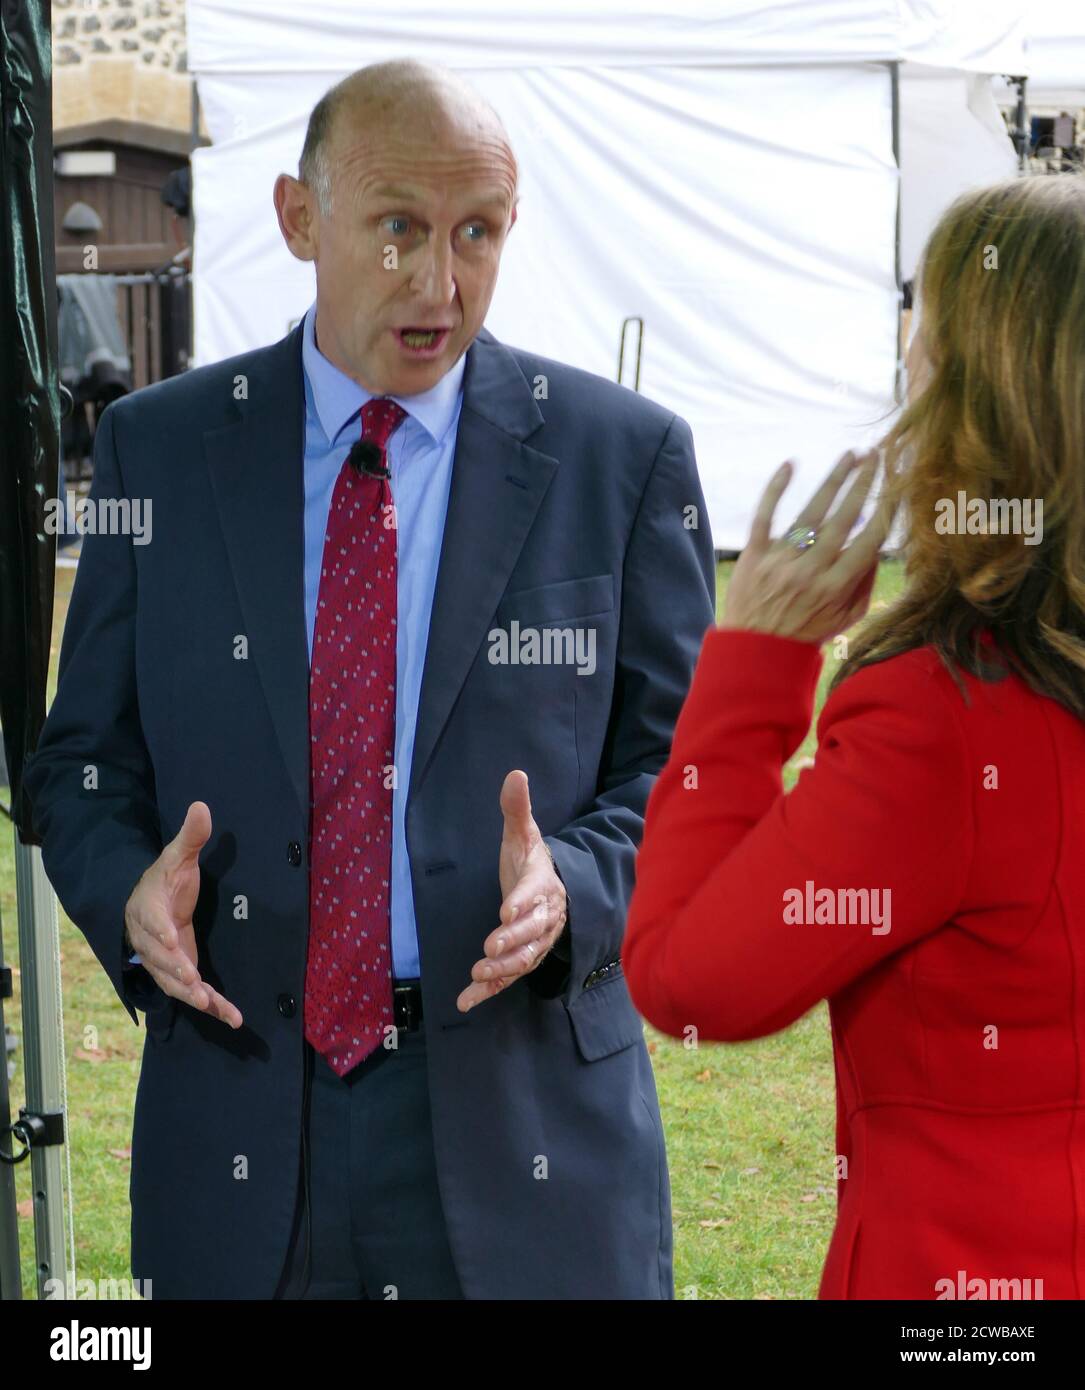 John Healey arrives to give media interviews, after returning to parliament after the prorogation was annulled by the Supreme Court. 25th September 2019. John Healey (born 1960); British Labour Party politician serving as Member of Parliament (MP) for Wentworth and Dearne since 1997 and Shadow Secretary of State for Housing since 2016. Stock Photo